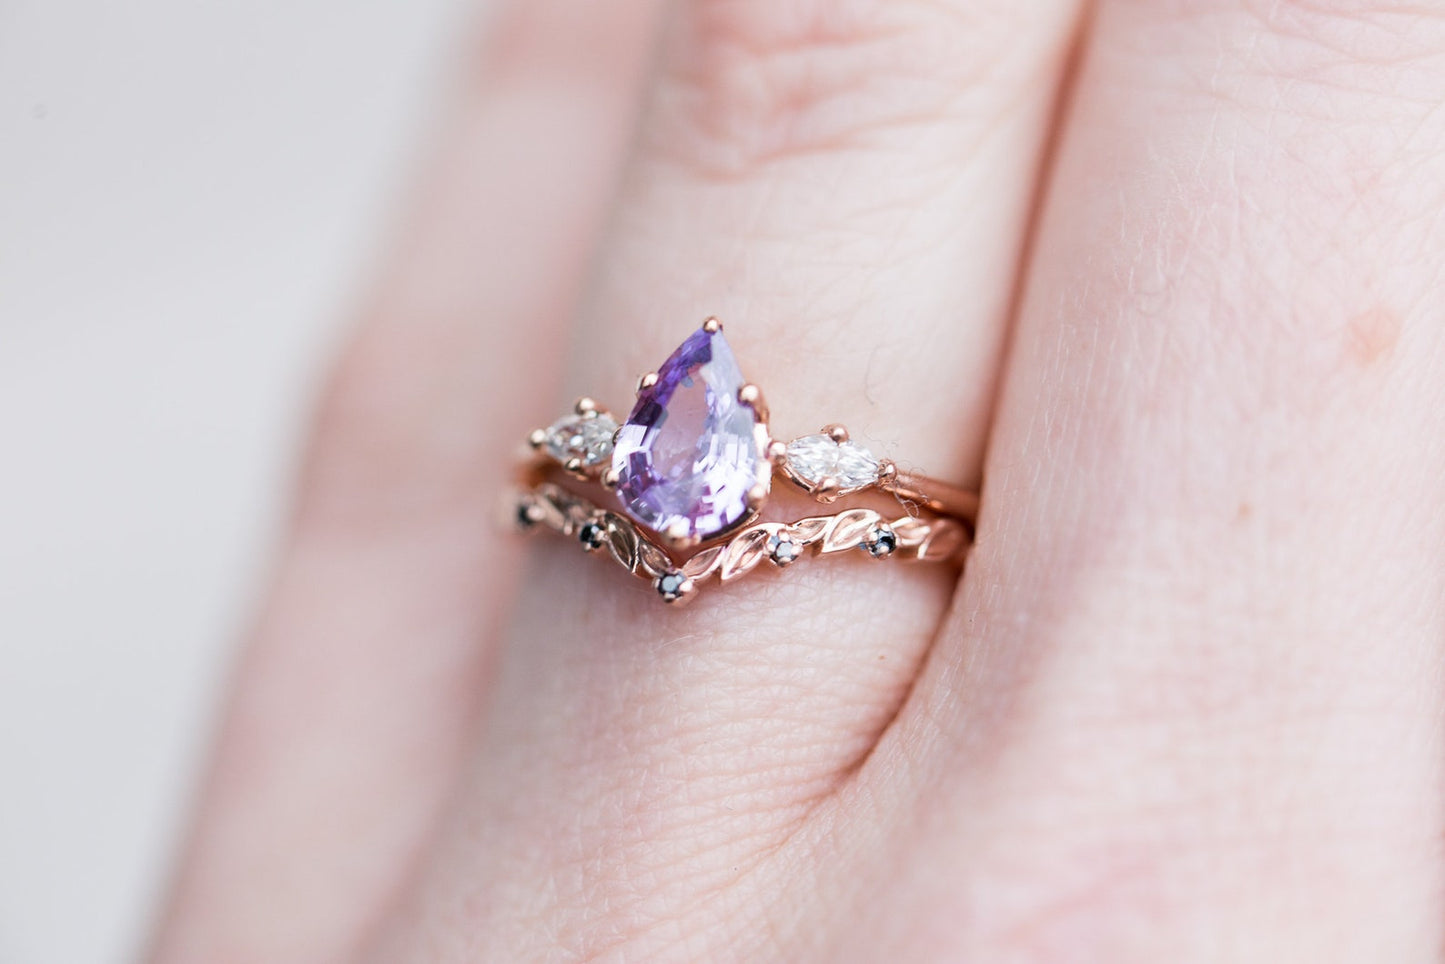 Buy 1.82 ctw Amethyst Ring with Diamond Halo in 14K White Gold Online |  Arnold Jewelers